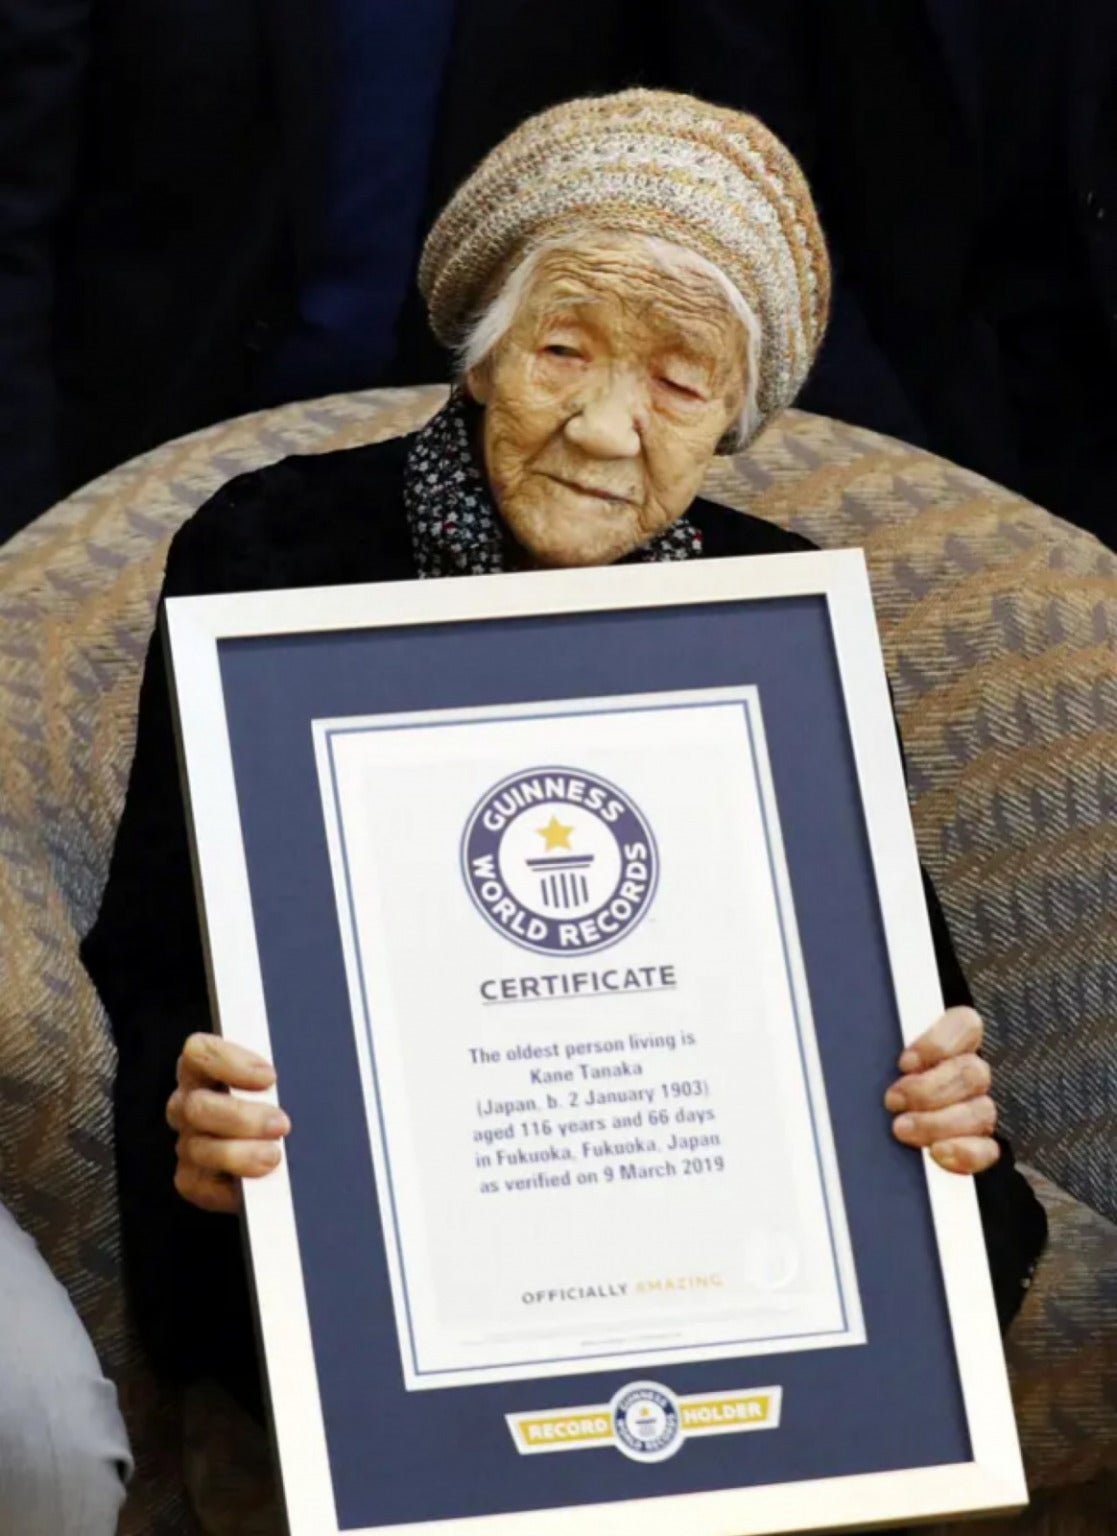 World’s Oldest Person, 118yo Kane Tanaka Will Carry The Torch For Tokyo